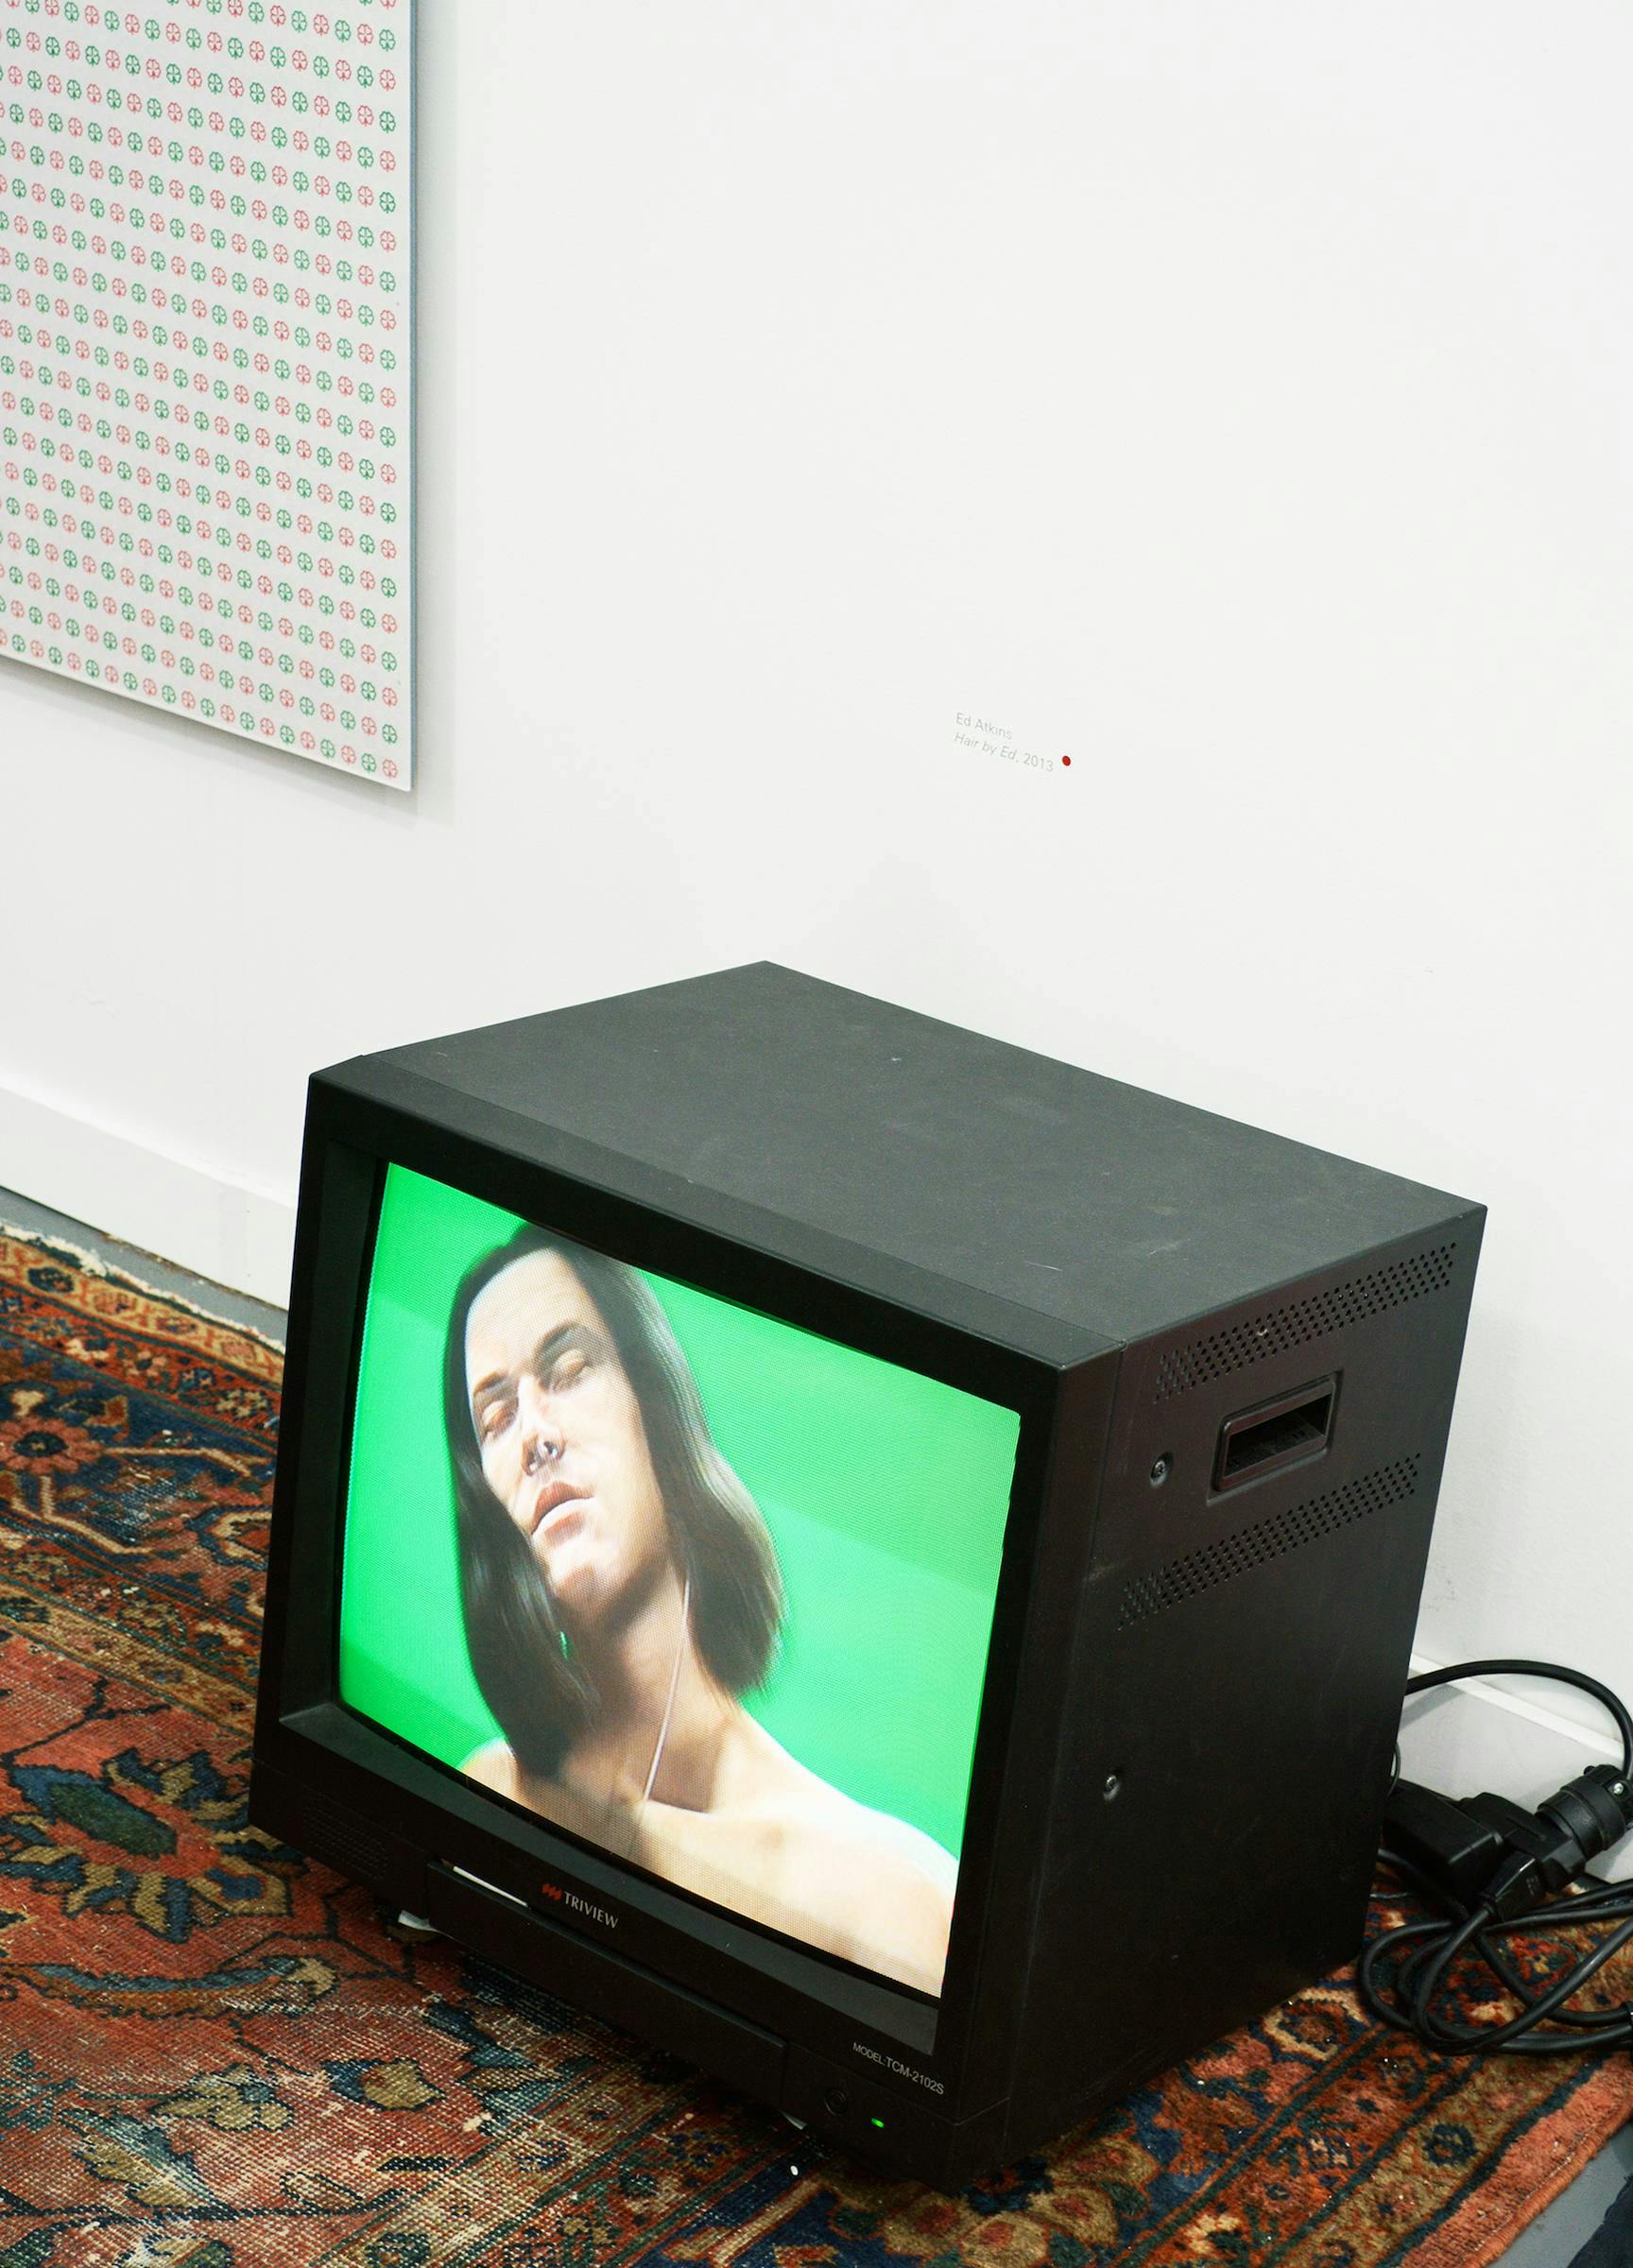 an installation image of Hair by Ed by Ed Atkins. The work is installed on a hantarex monitor and is sitting directly on a patterned carpet